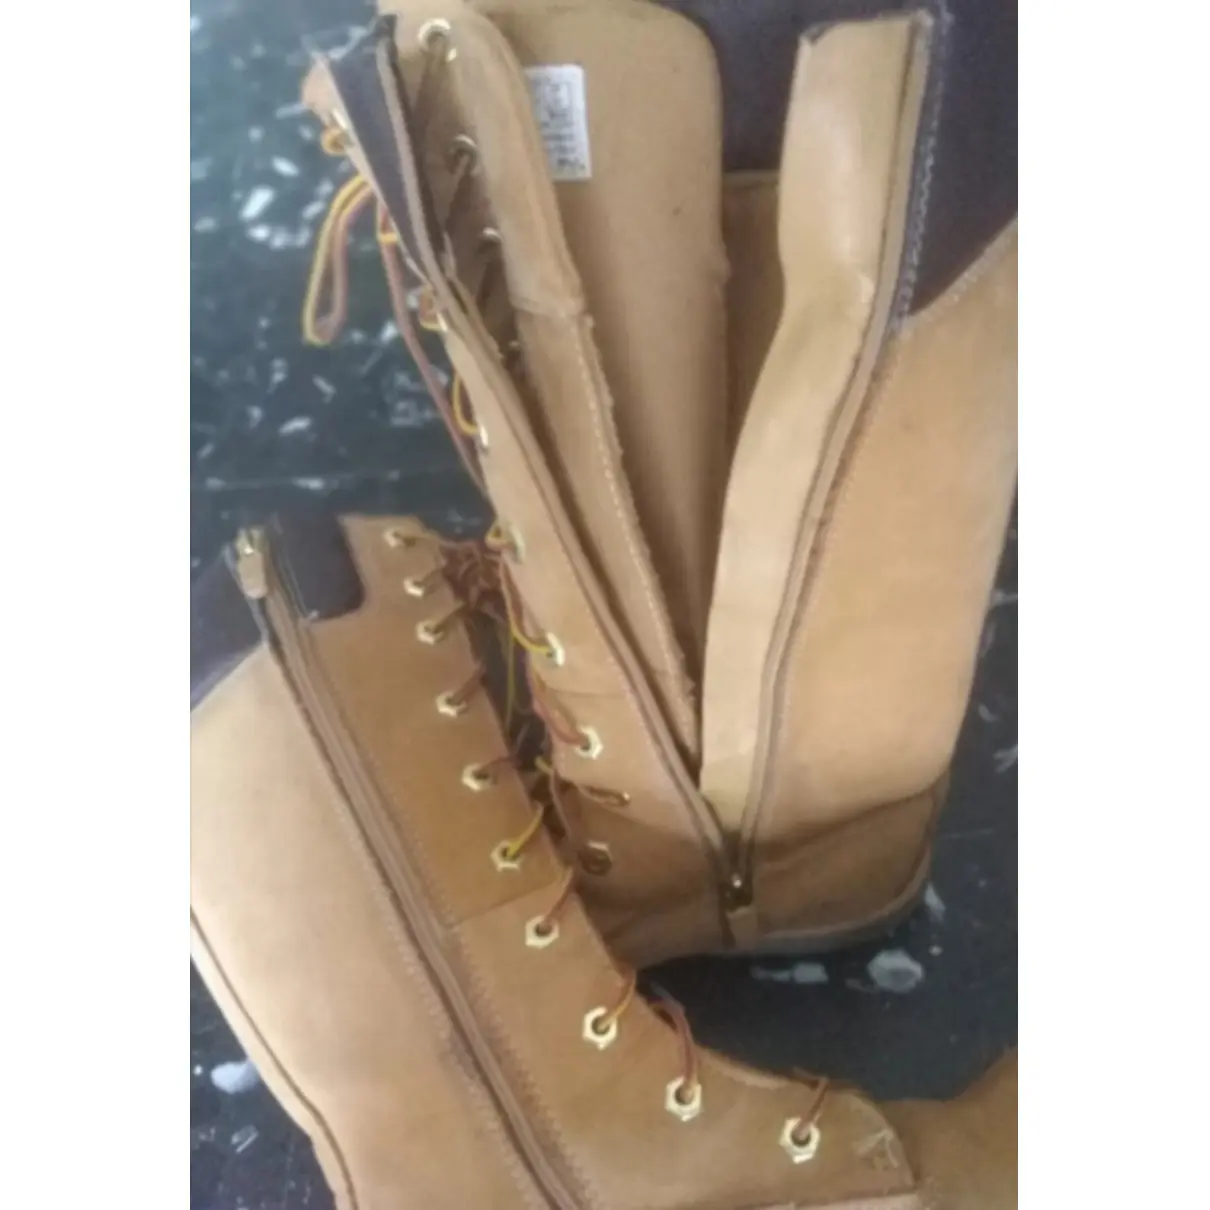 Leather riding boots Timberland